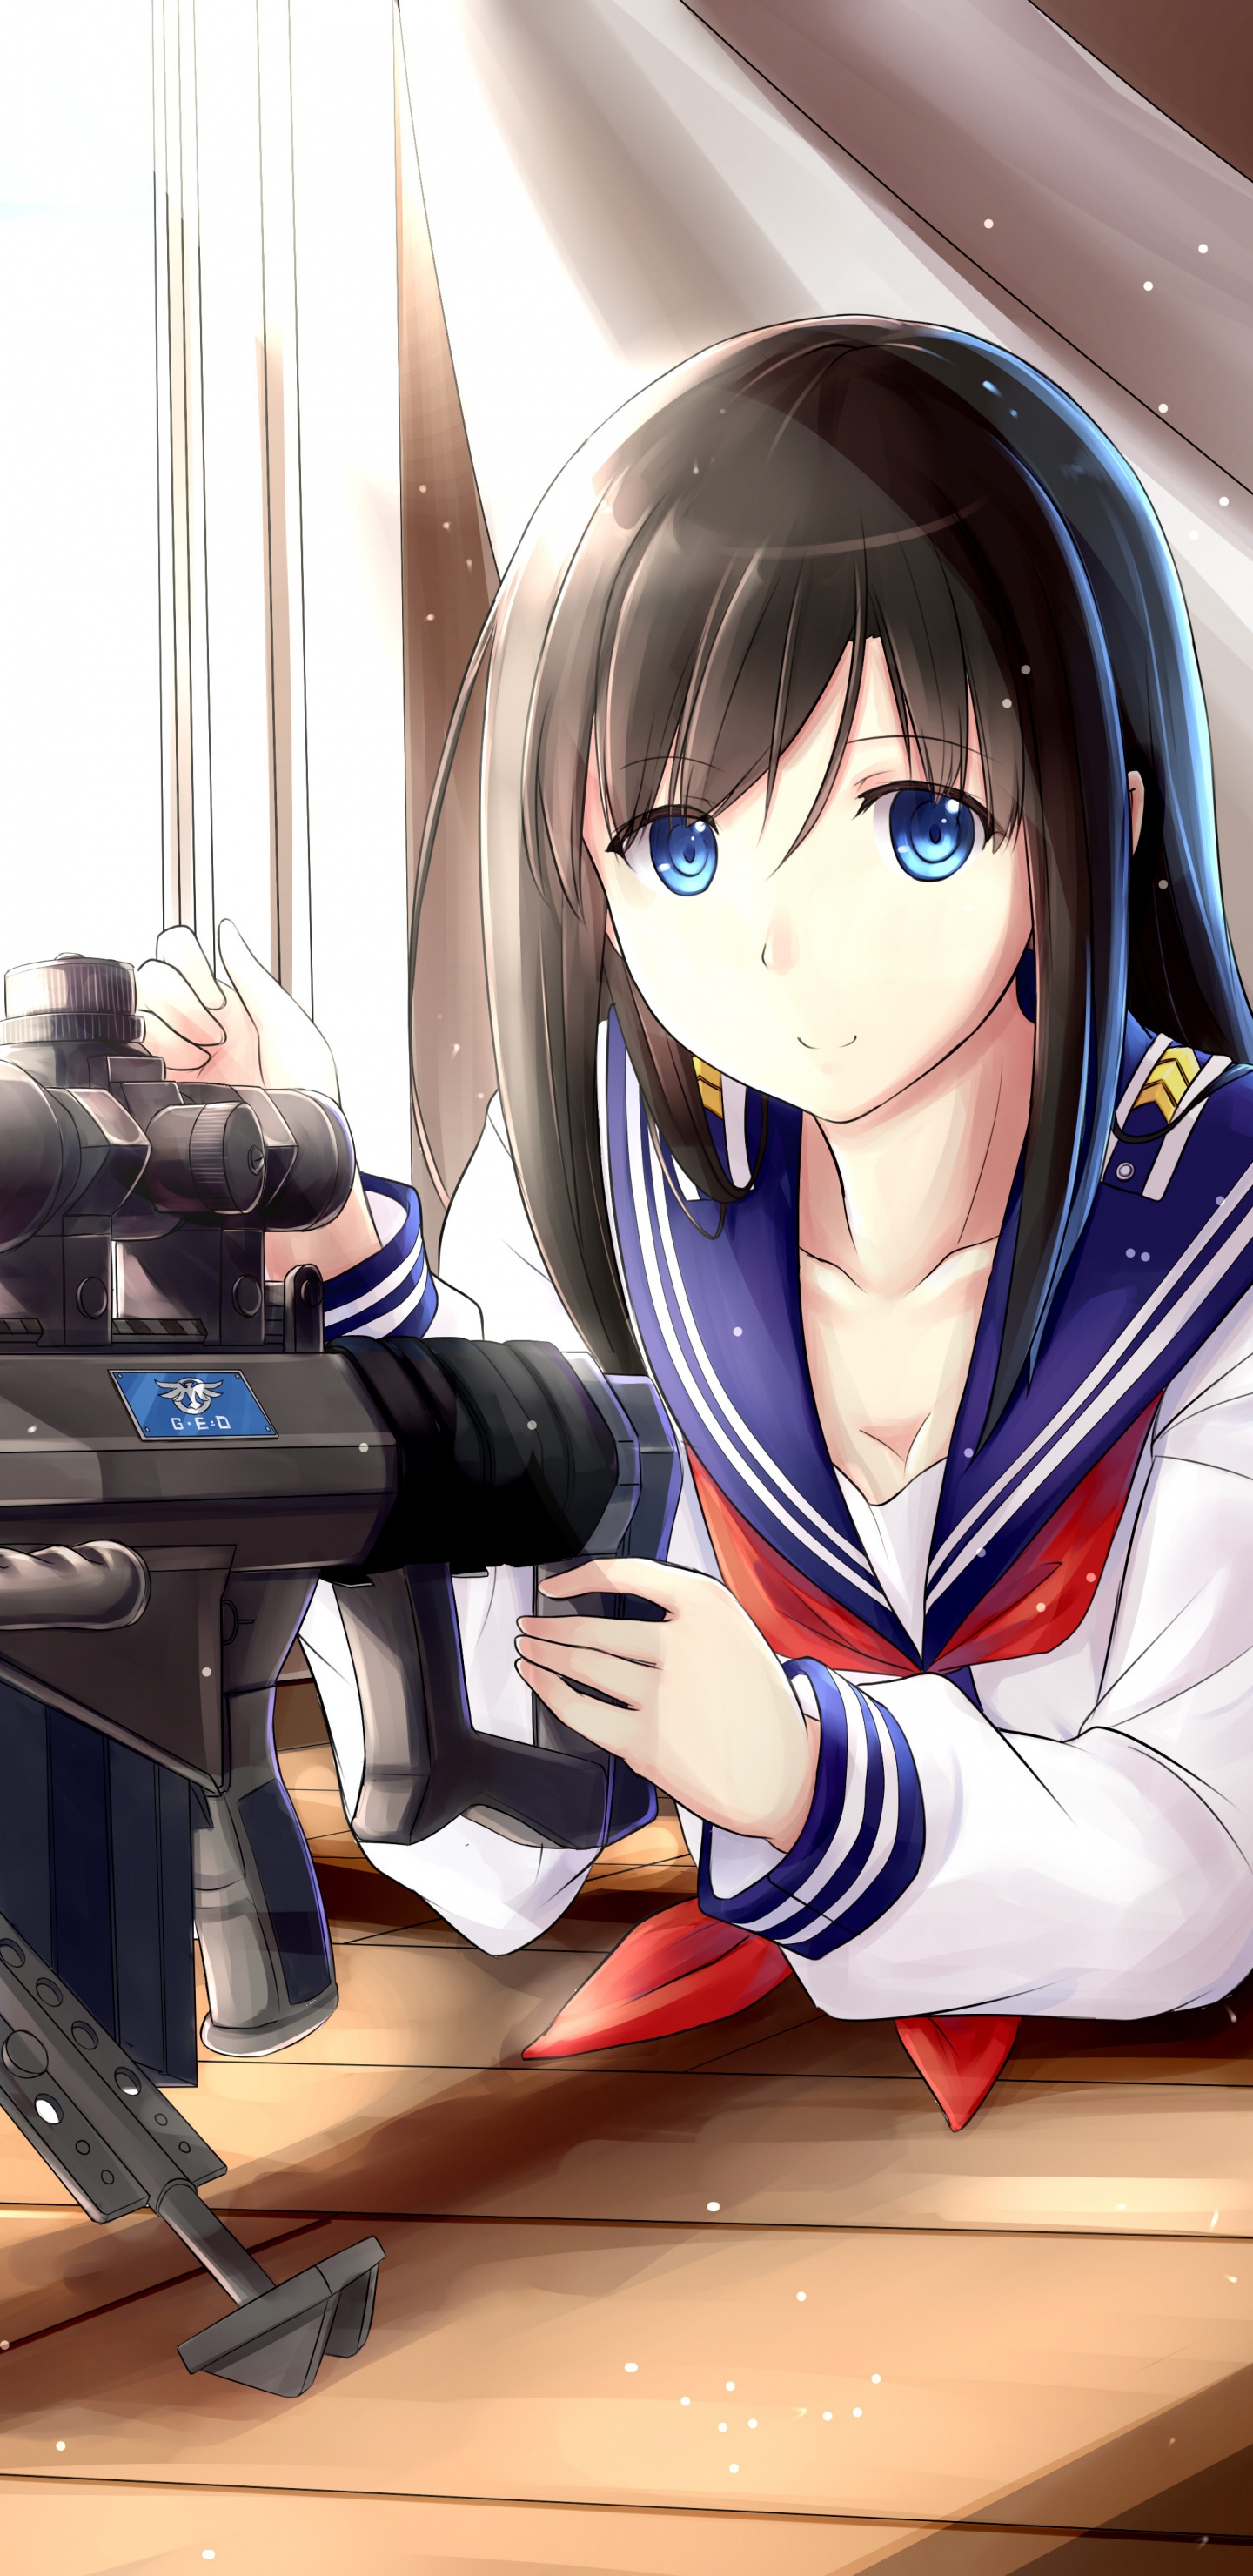 Woman in White and Blue Jacket Holding Black Rifle. Wallpaper in 1440x2960 Resolution